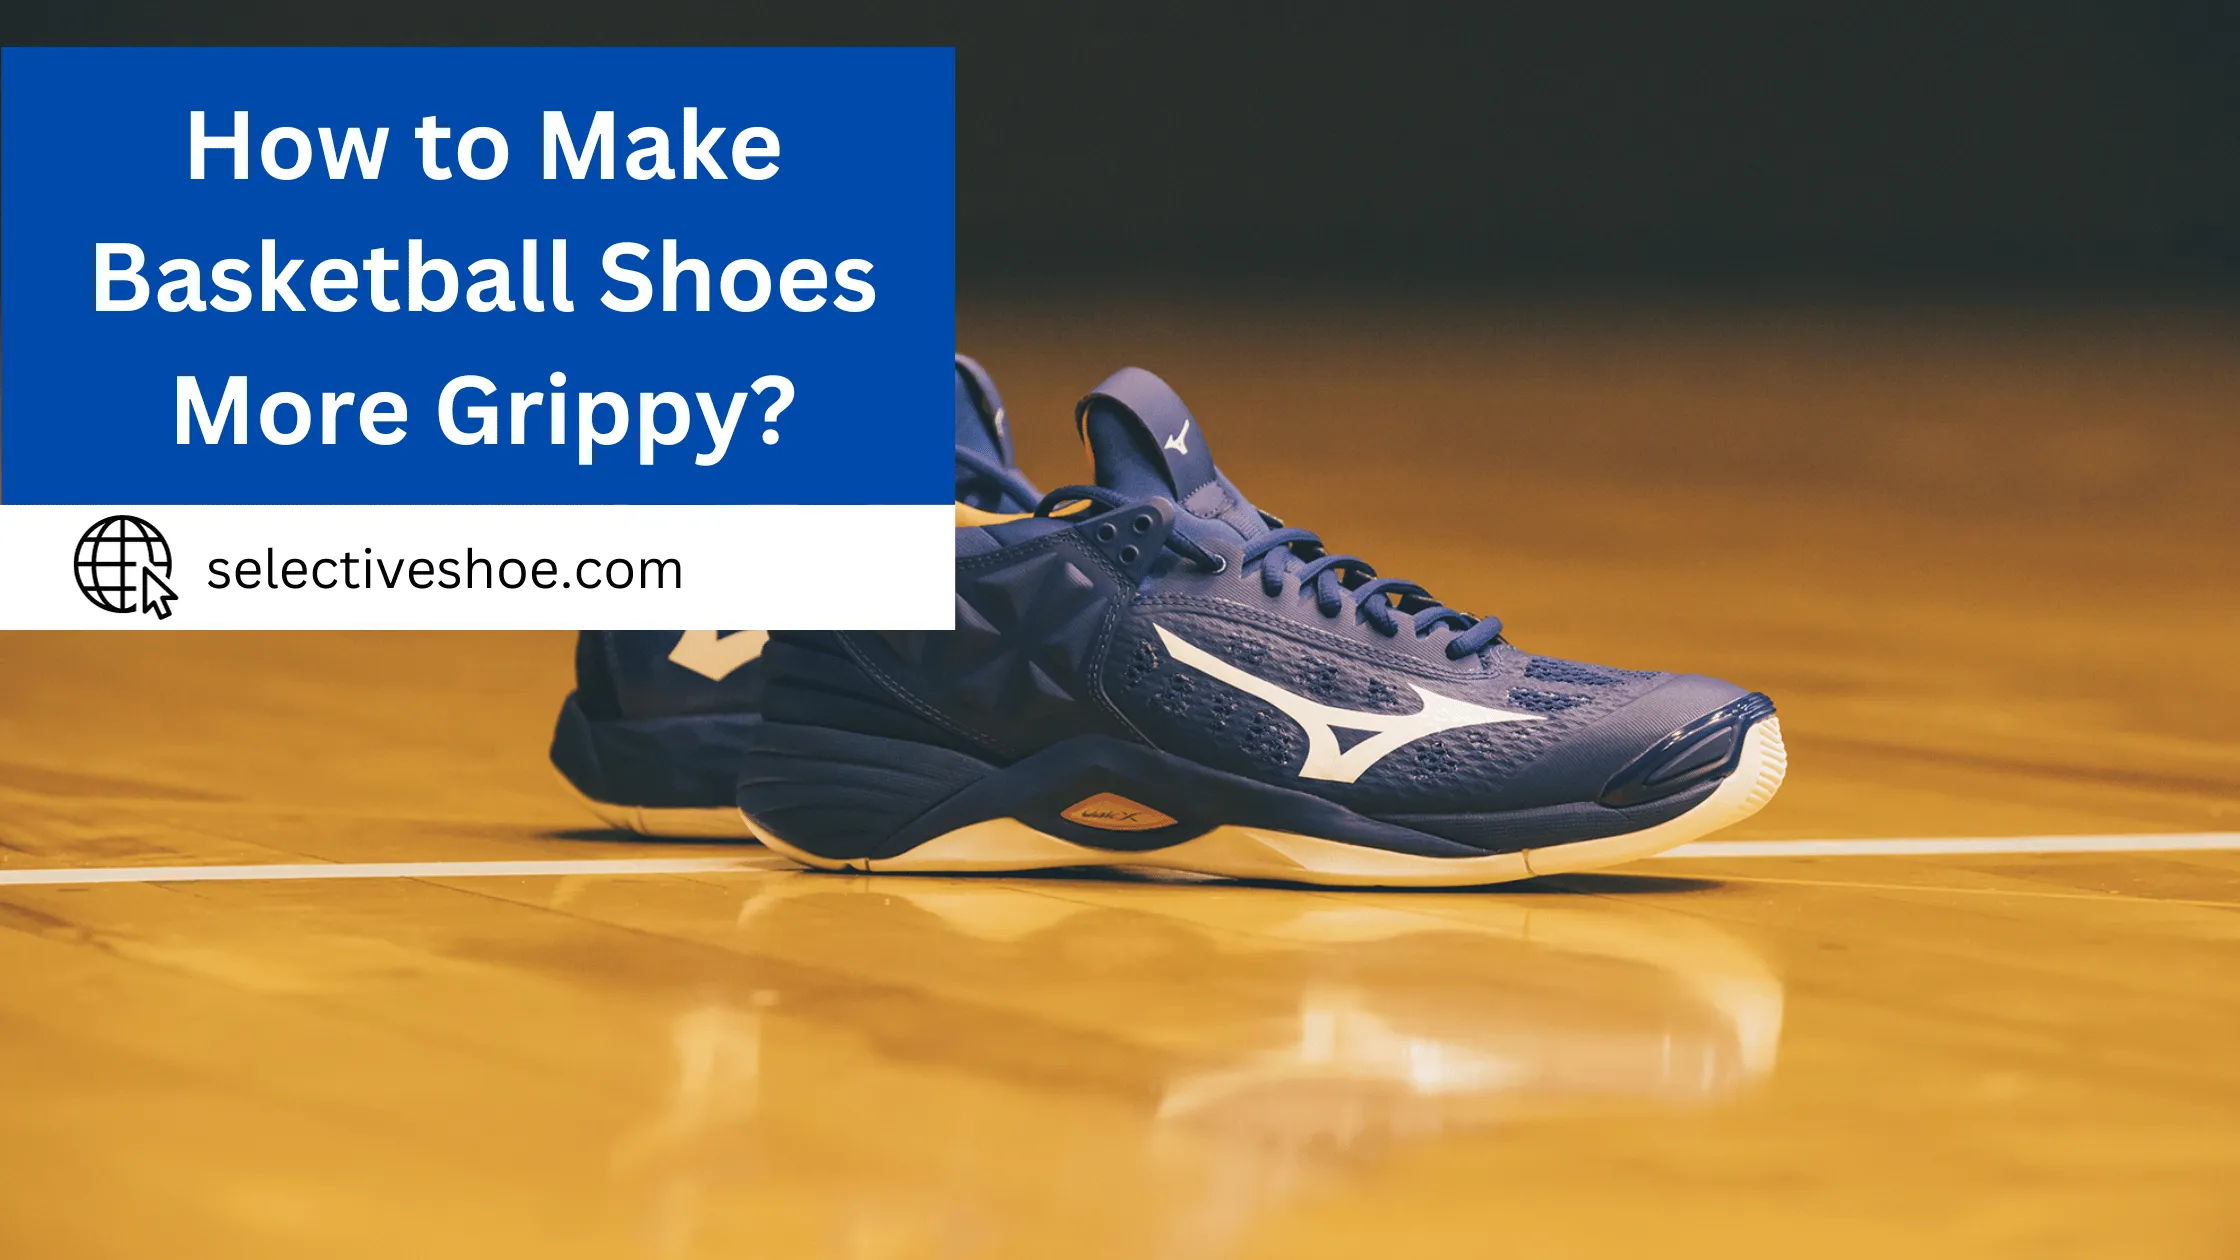 How to Make Basketball Shoes More Grippy? Easy Guide